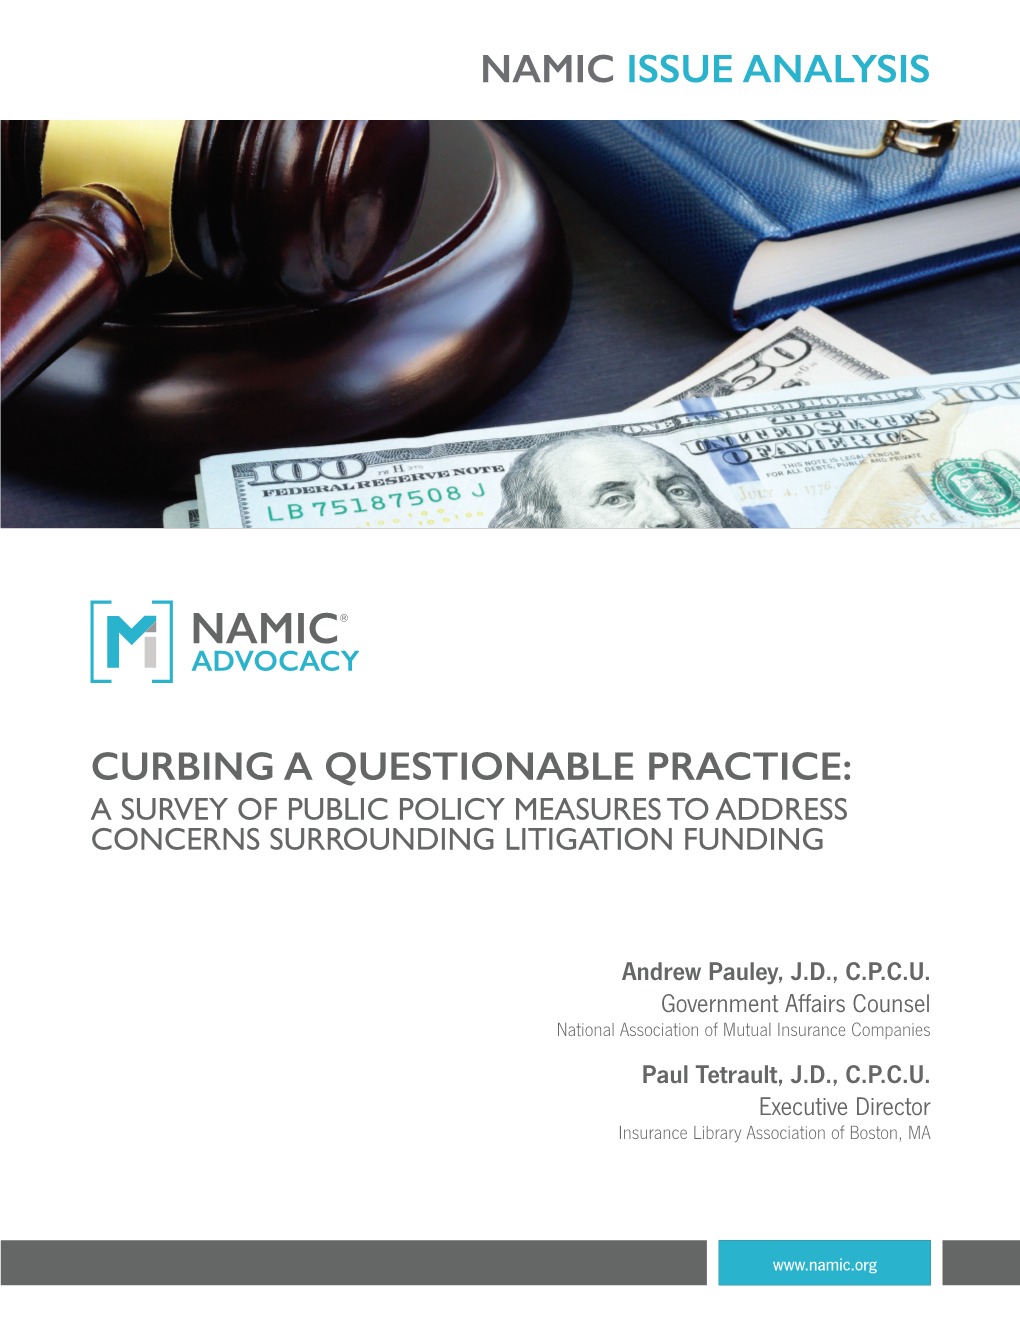 Namic Issue Analysis Curbing a Questionable Practice